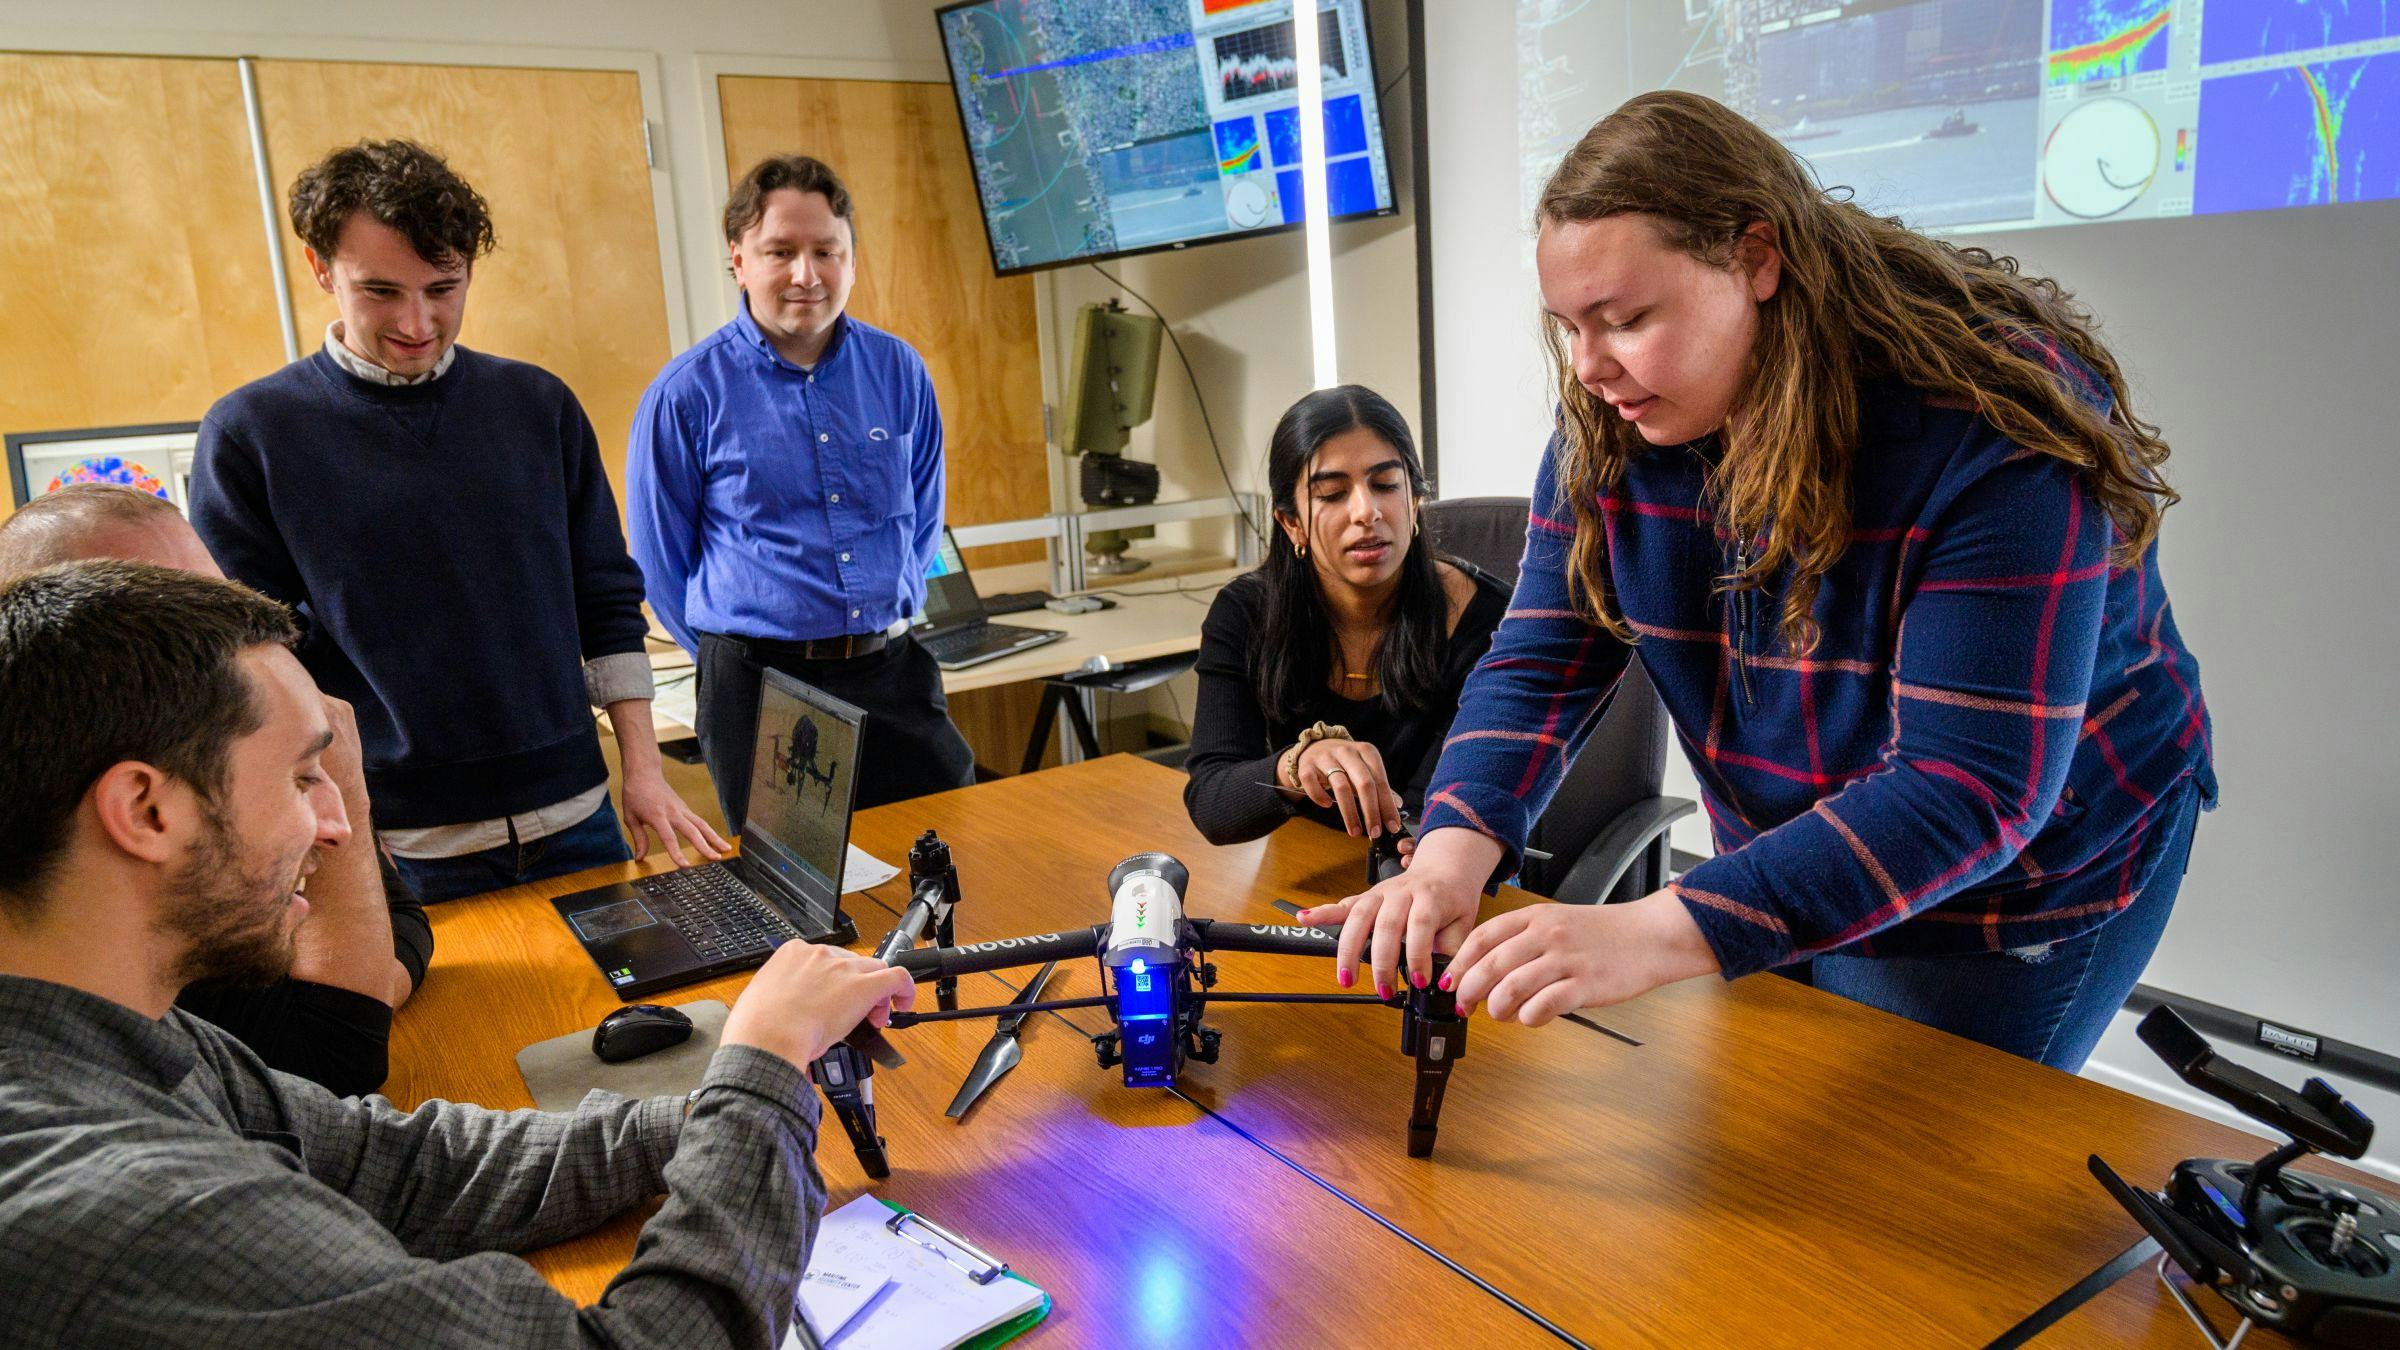 Students and professor adjust a drone in a classroom.